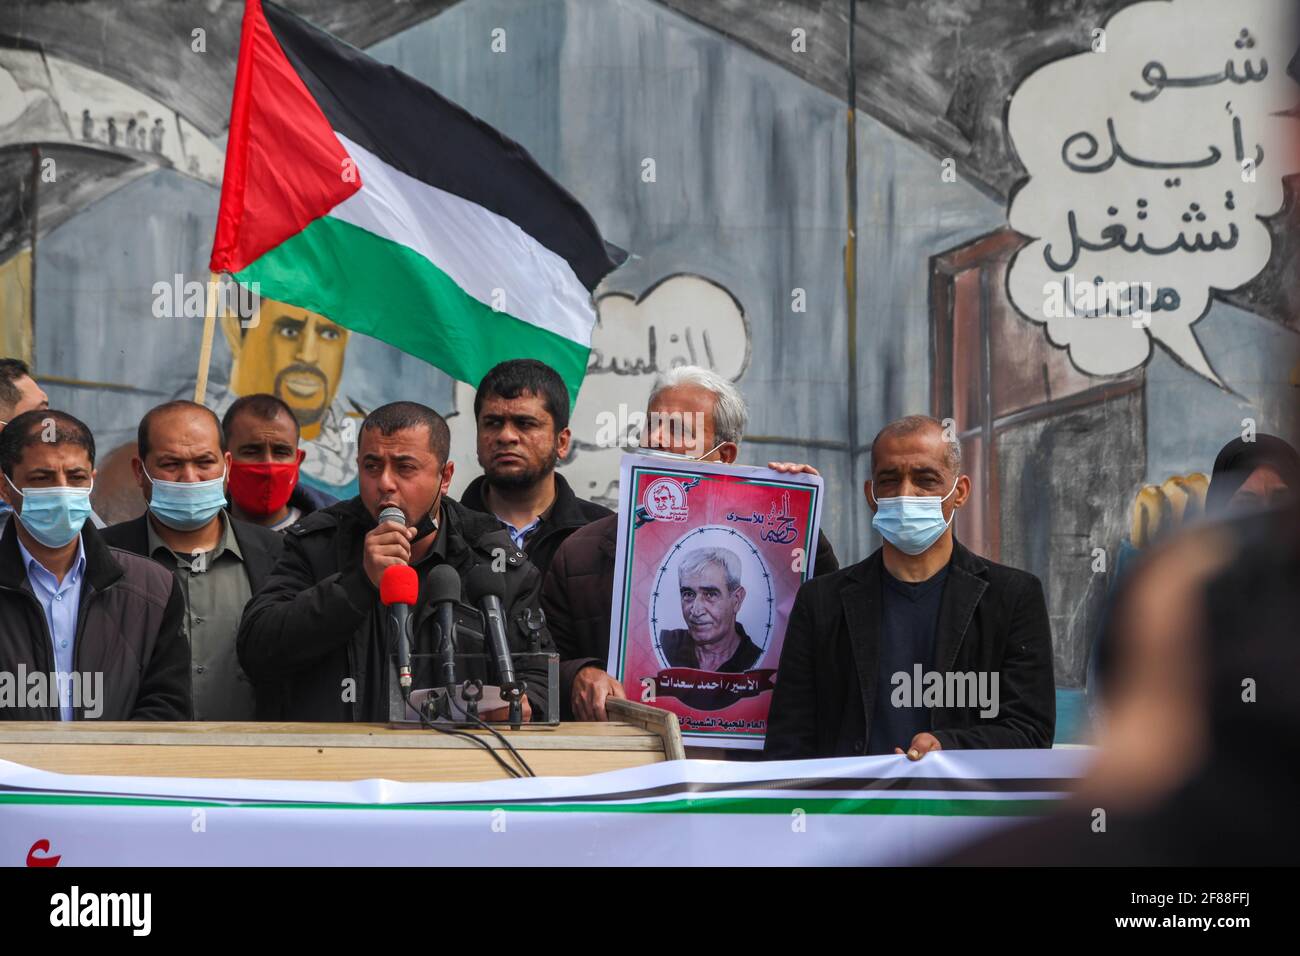 Palestinians take part in a protest to solidarity prisoners in Israeli jails on Palestinian Prisoners' Day, in front of Erez crossing, in Beit Hanoun in the northern Gaza Strip, Palestine, on April 12, 2021. Ramez Habboub/ABACAPRESS.COM Stock Photo